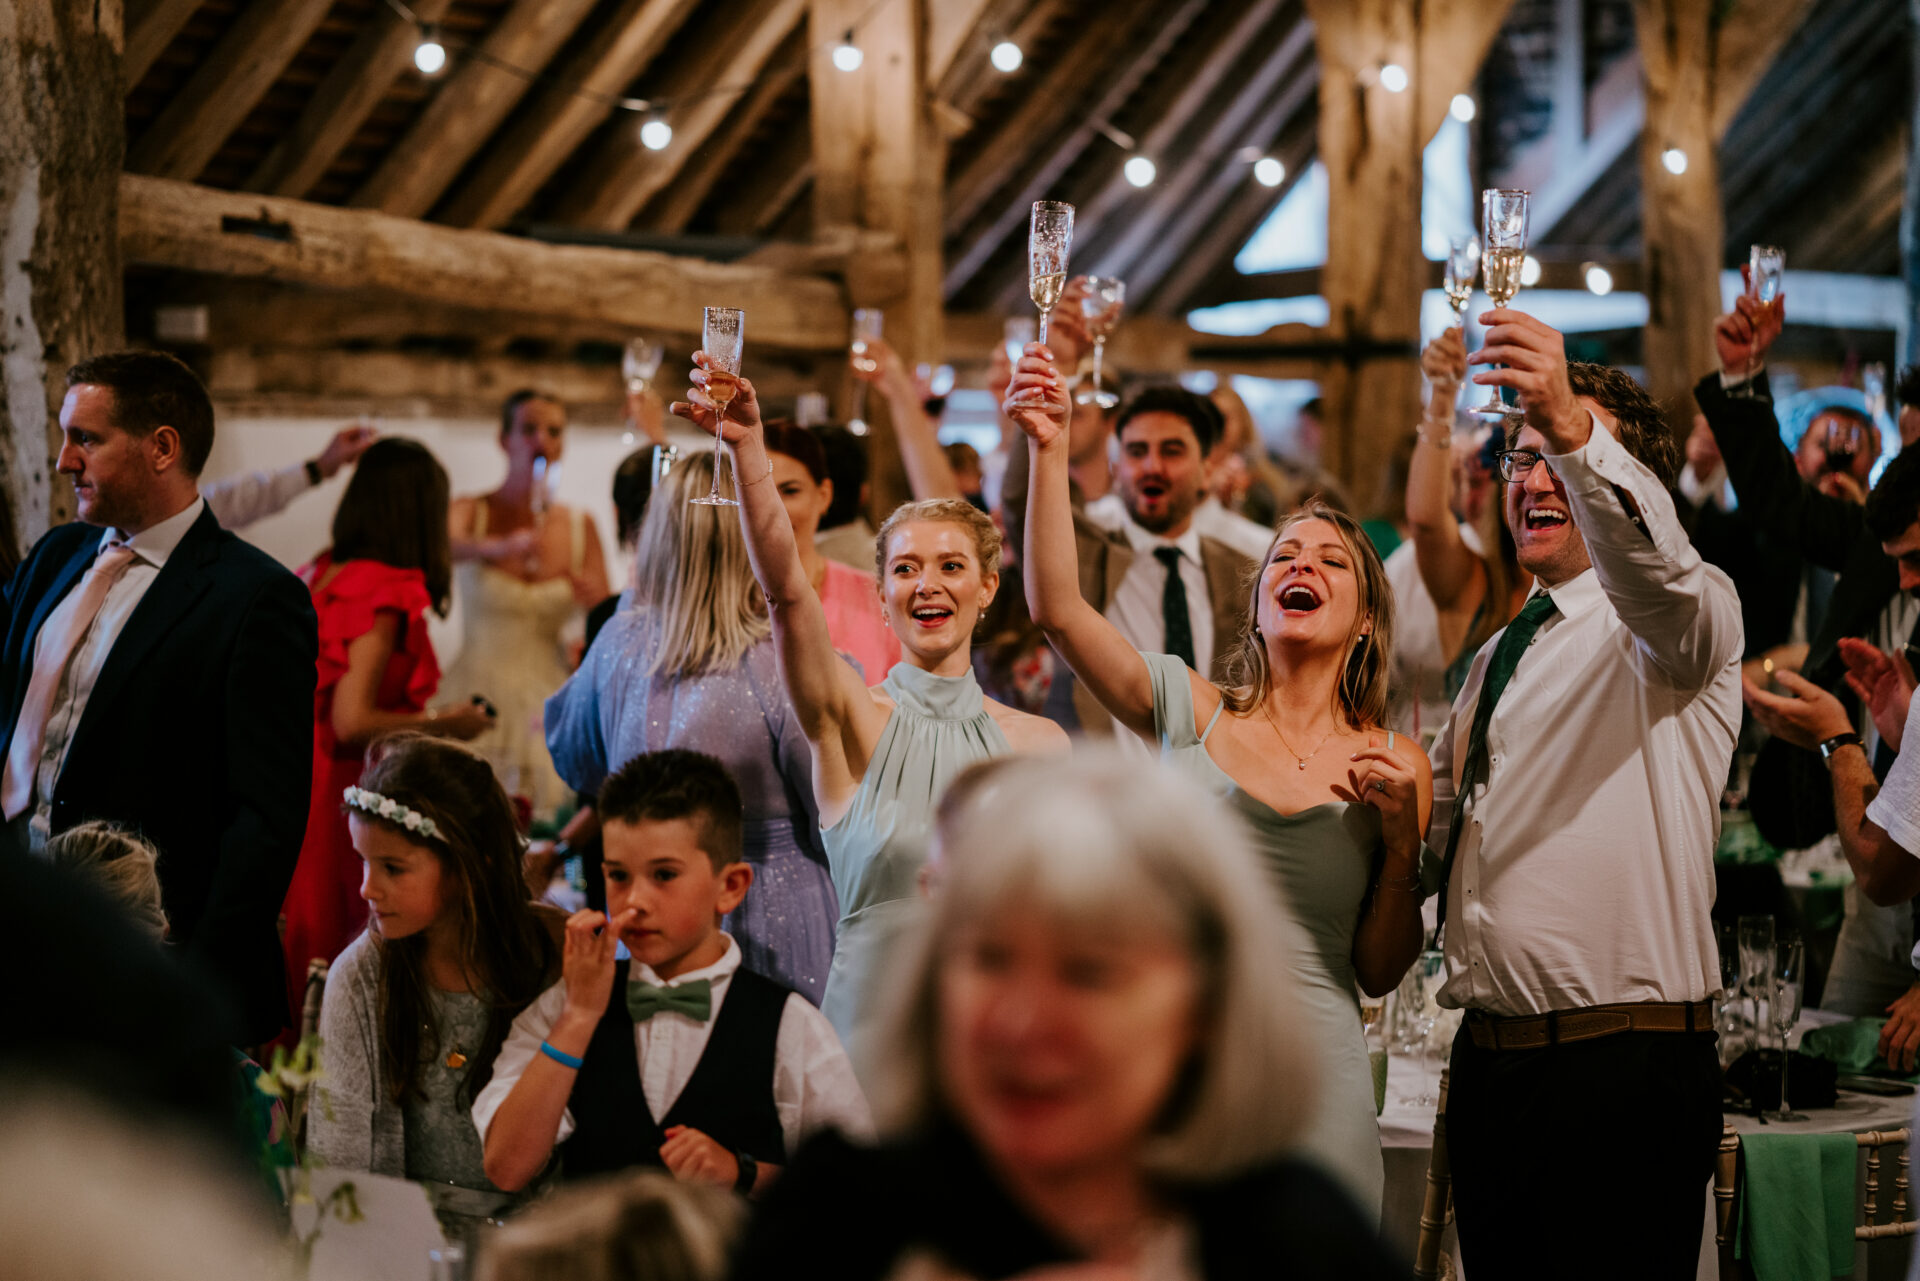 Friends and family at barn wedding at Sullington Manor Farm, West Sussex, RH20 4AE. Farm wedding in South Downs